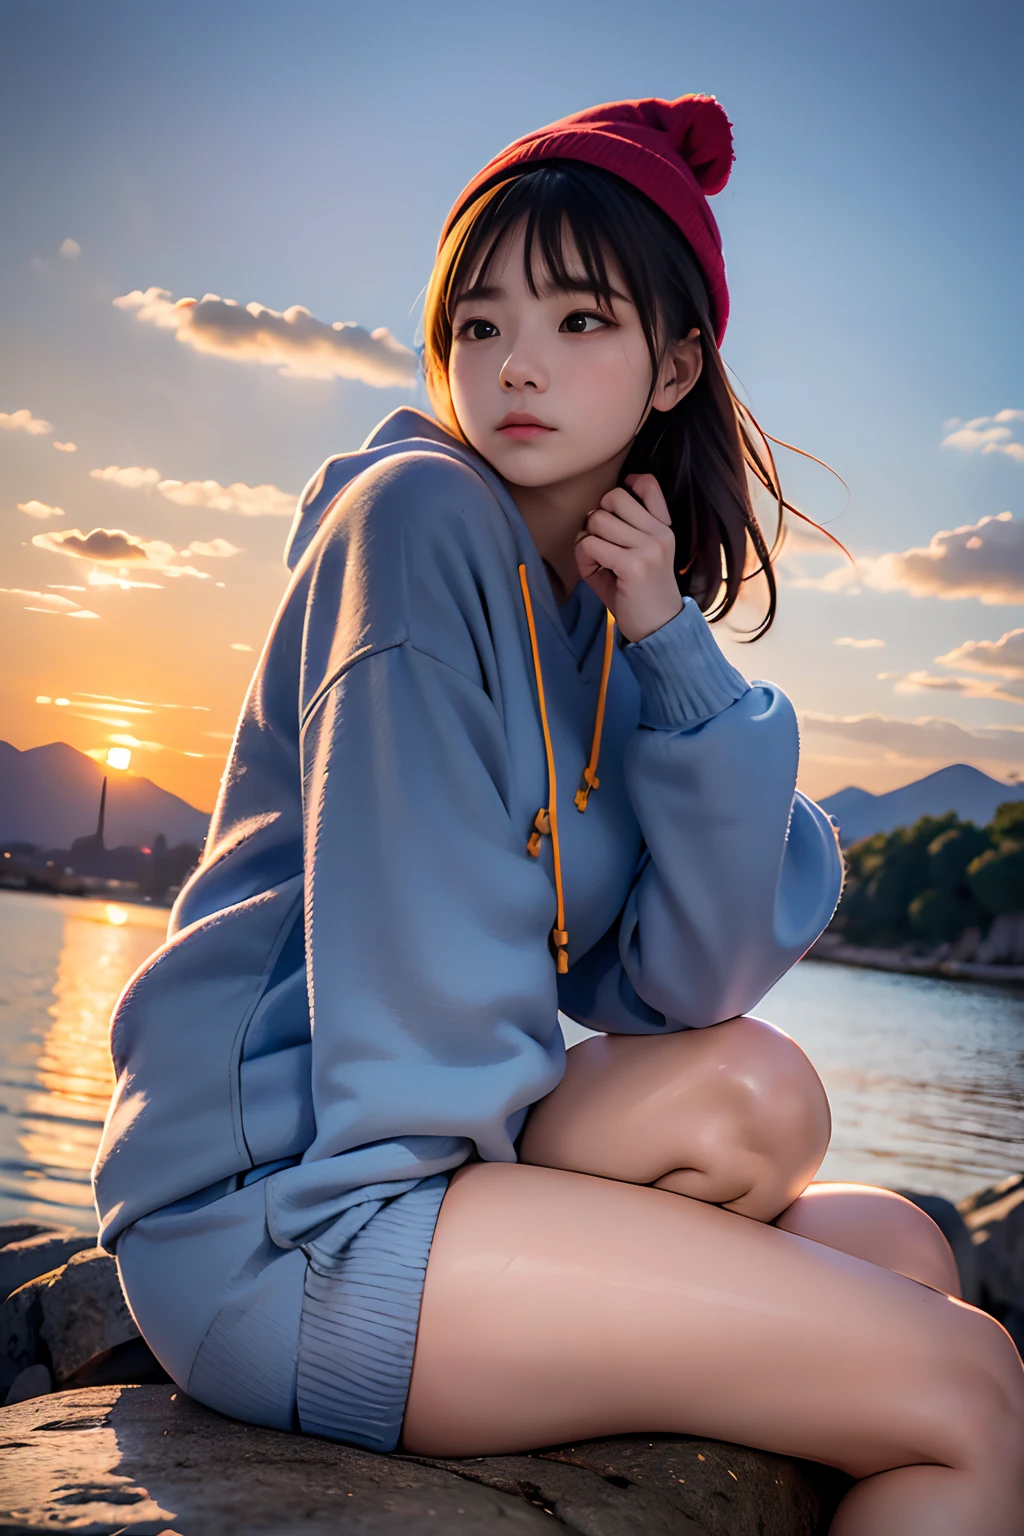 top-quality、masuter piece、Ultra-detail、8ｋ、solo、parfect anatomy、sixteen years old、(((Girl sitting on a huge rock looking at the sky、up looking_Away:1.2、Looking at the sky)))、From Side、knit hat、Greyprint Hoodie、Straight Old Denim、bare-legged、、Dusk atmosphere、evening、Sunset、blurry backround:1.5、plein air、Mountains of the Andes々々、Orange sky、Scaly clouds